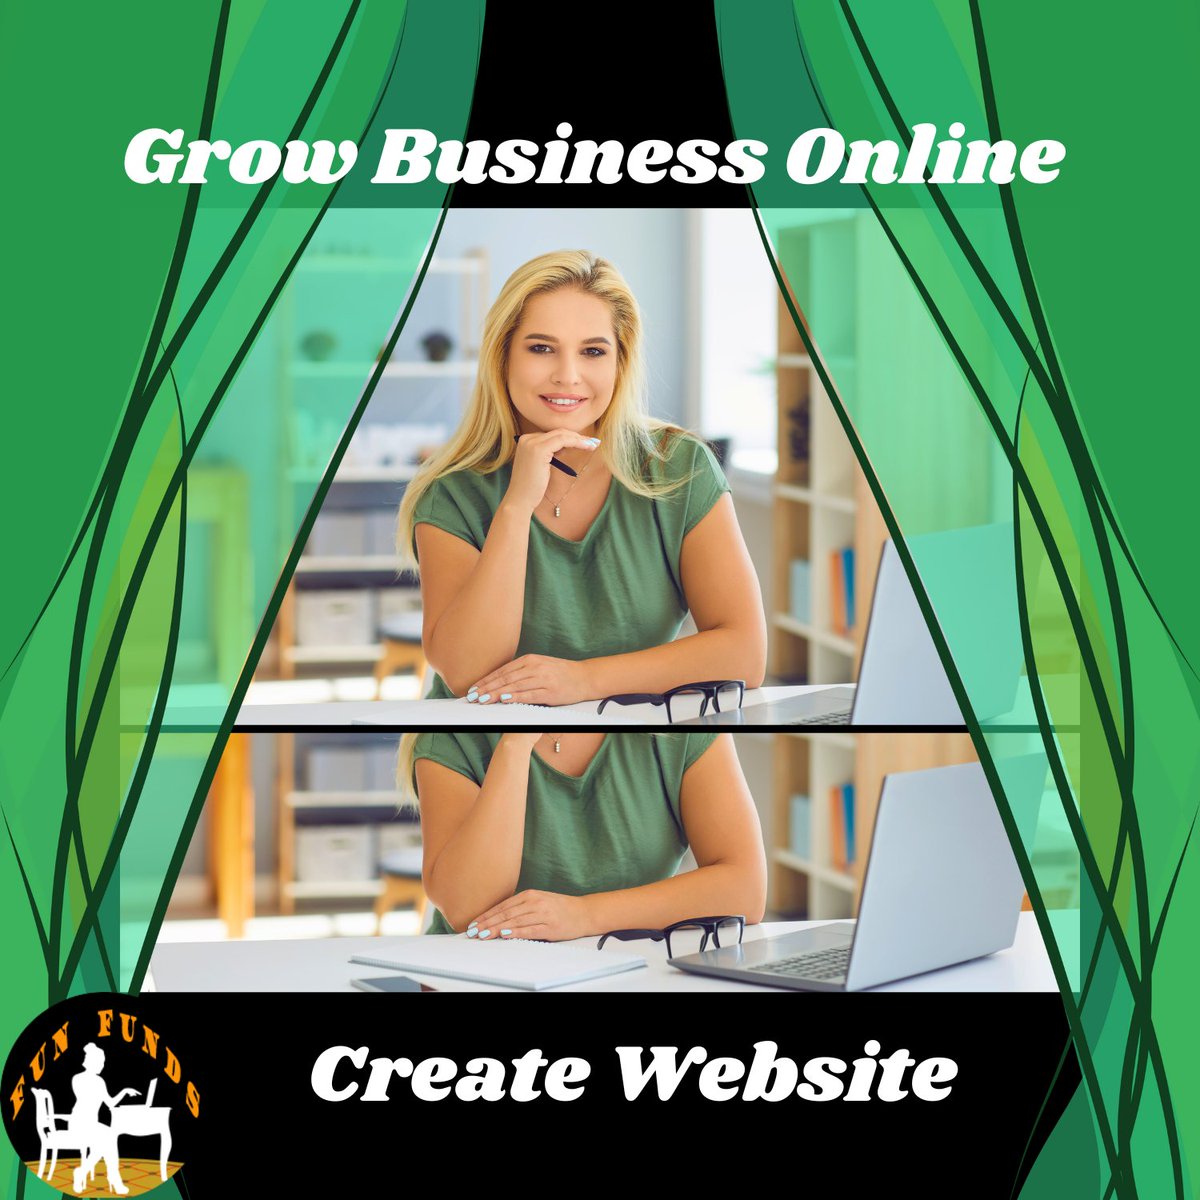 The first effective step for growing a business online is to create a website.

mastpaisa.blogspot.com/p/3-simple-ste…

#mastpaisa #funfunds
#business #smallbusiness #homebusiness #grow #growbusiness #growonline  #createwebsite #createyourown #createyourself #createyourfuture #BusinessOnline